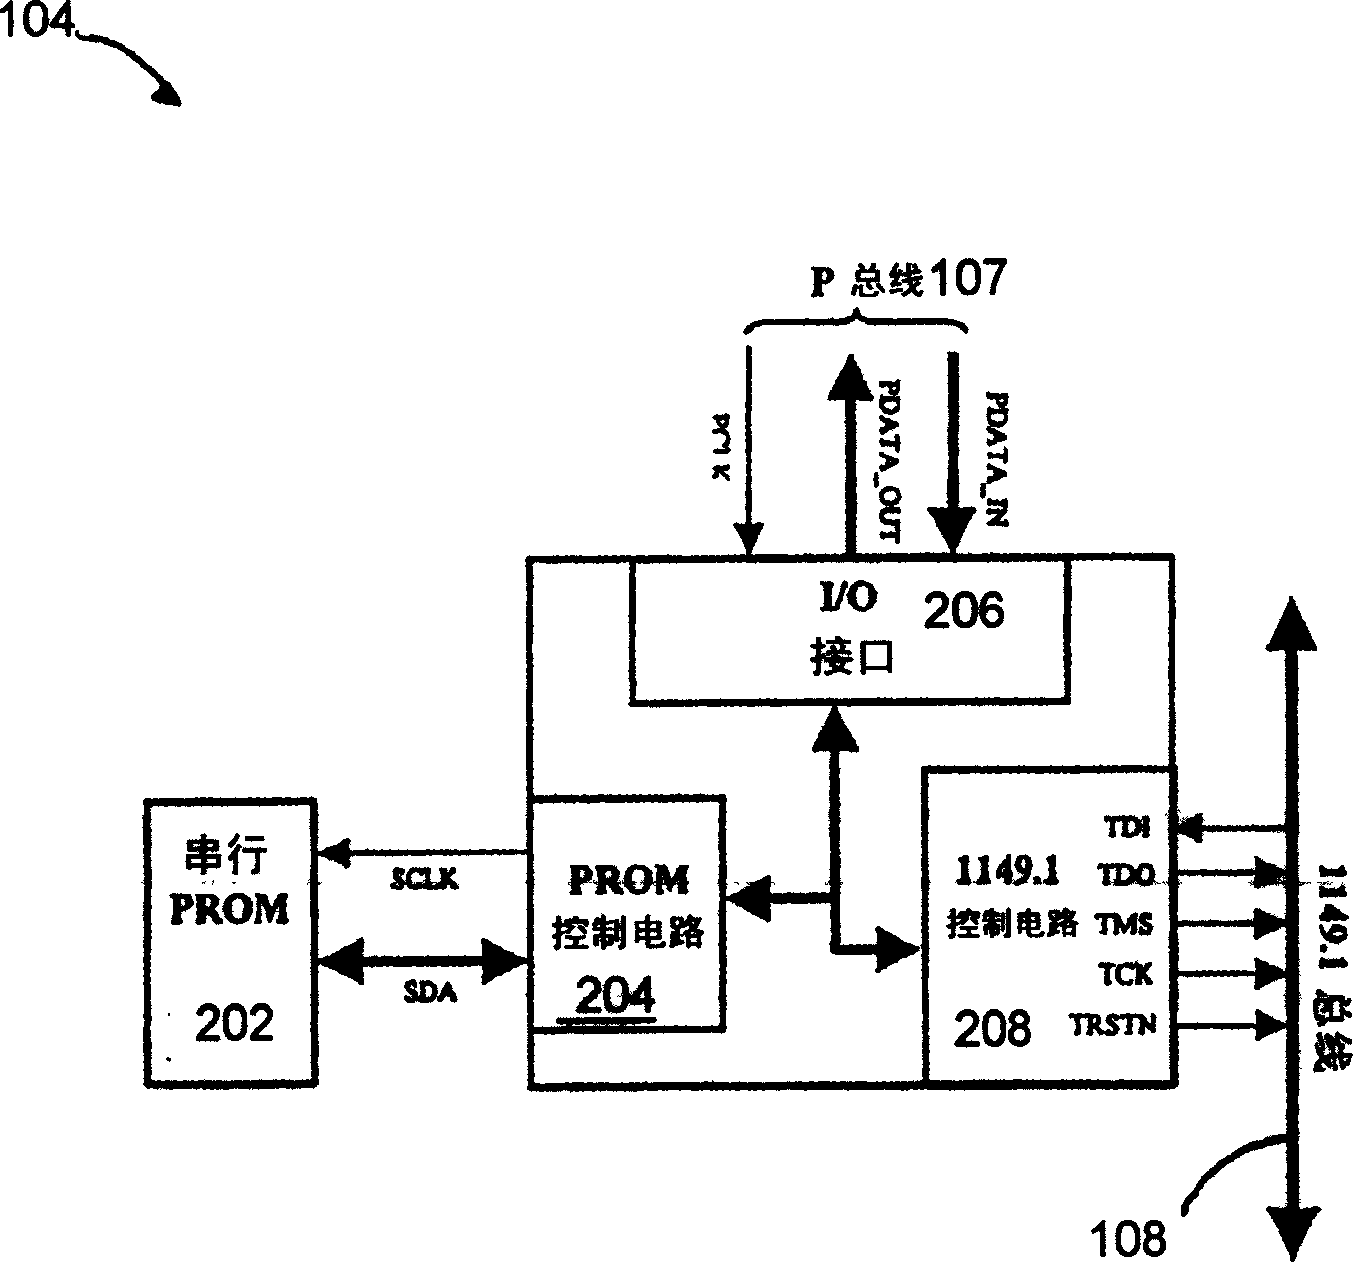 Management system, method and apparatus for licensed delivery and accounting of electronic circuits